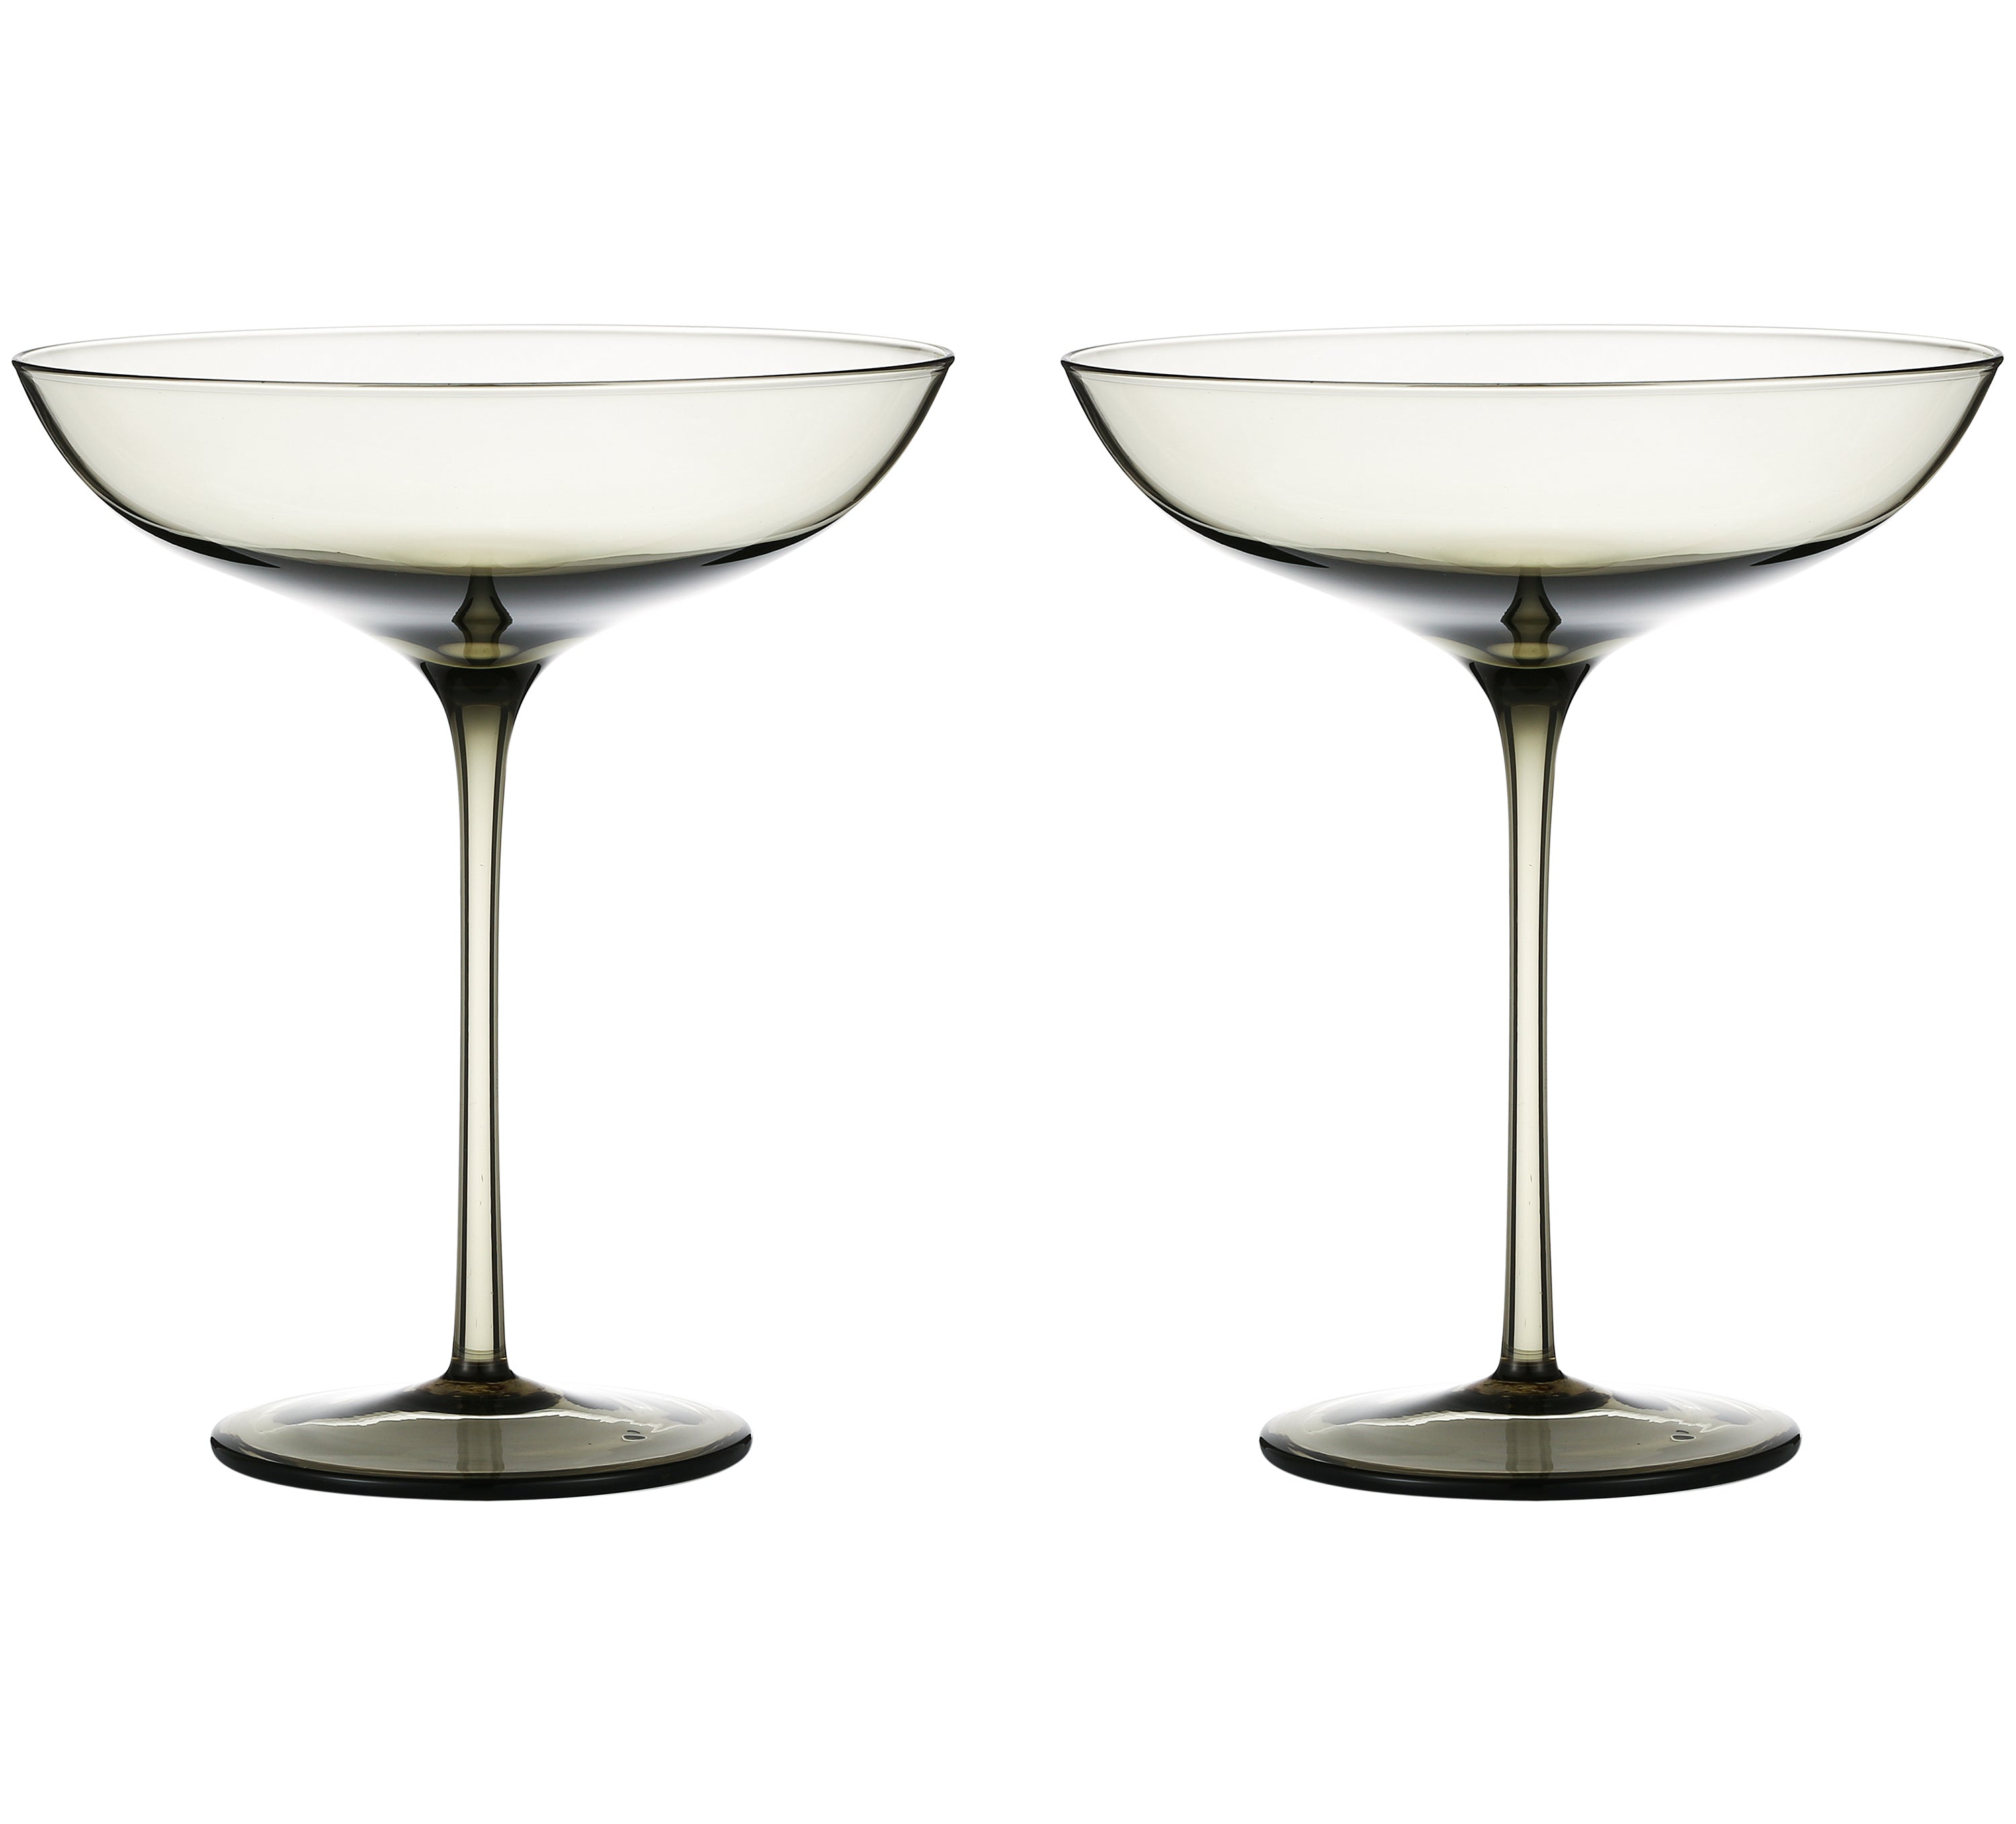 Berkware Set of 2 Luxurious and Elegant Coupe Cocktail Glass - Blue